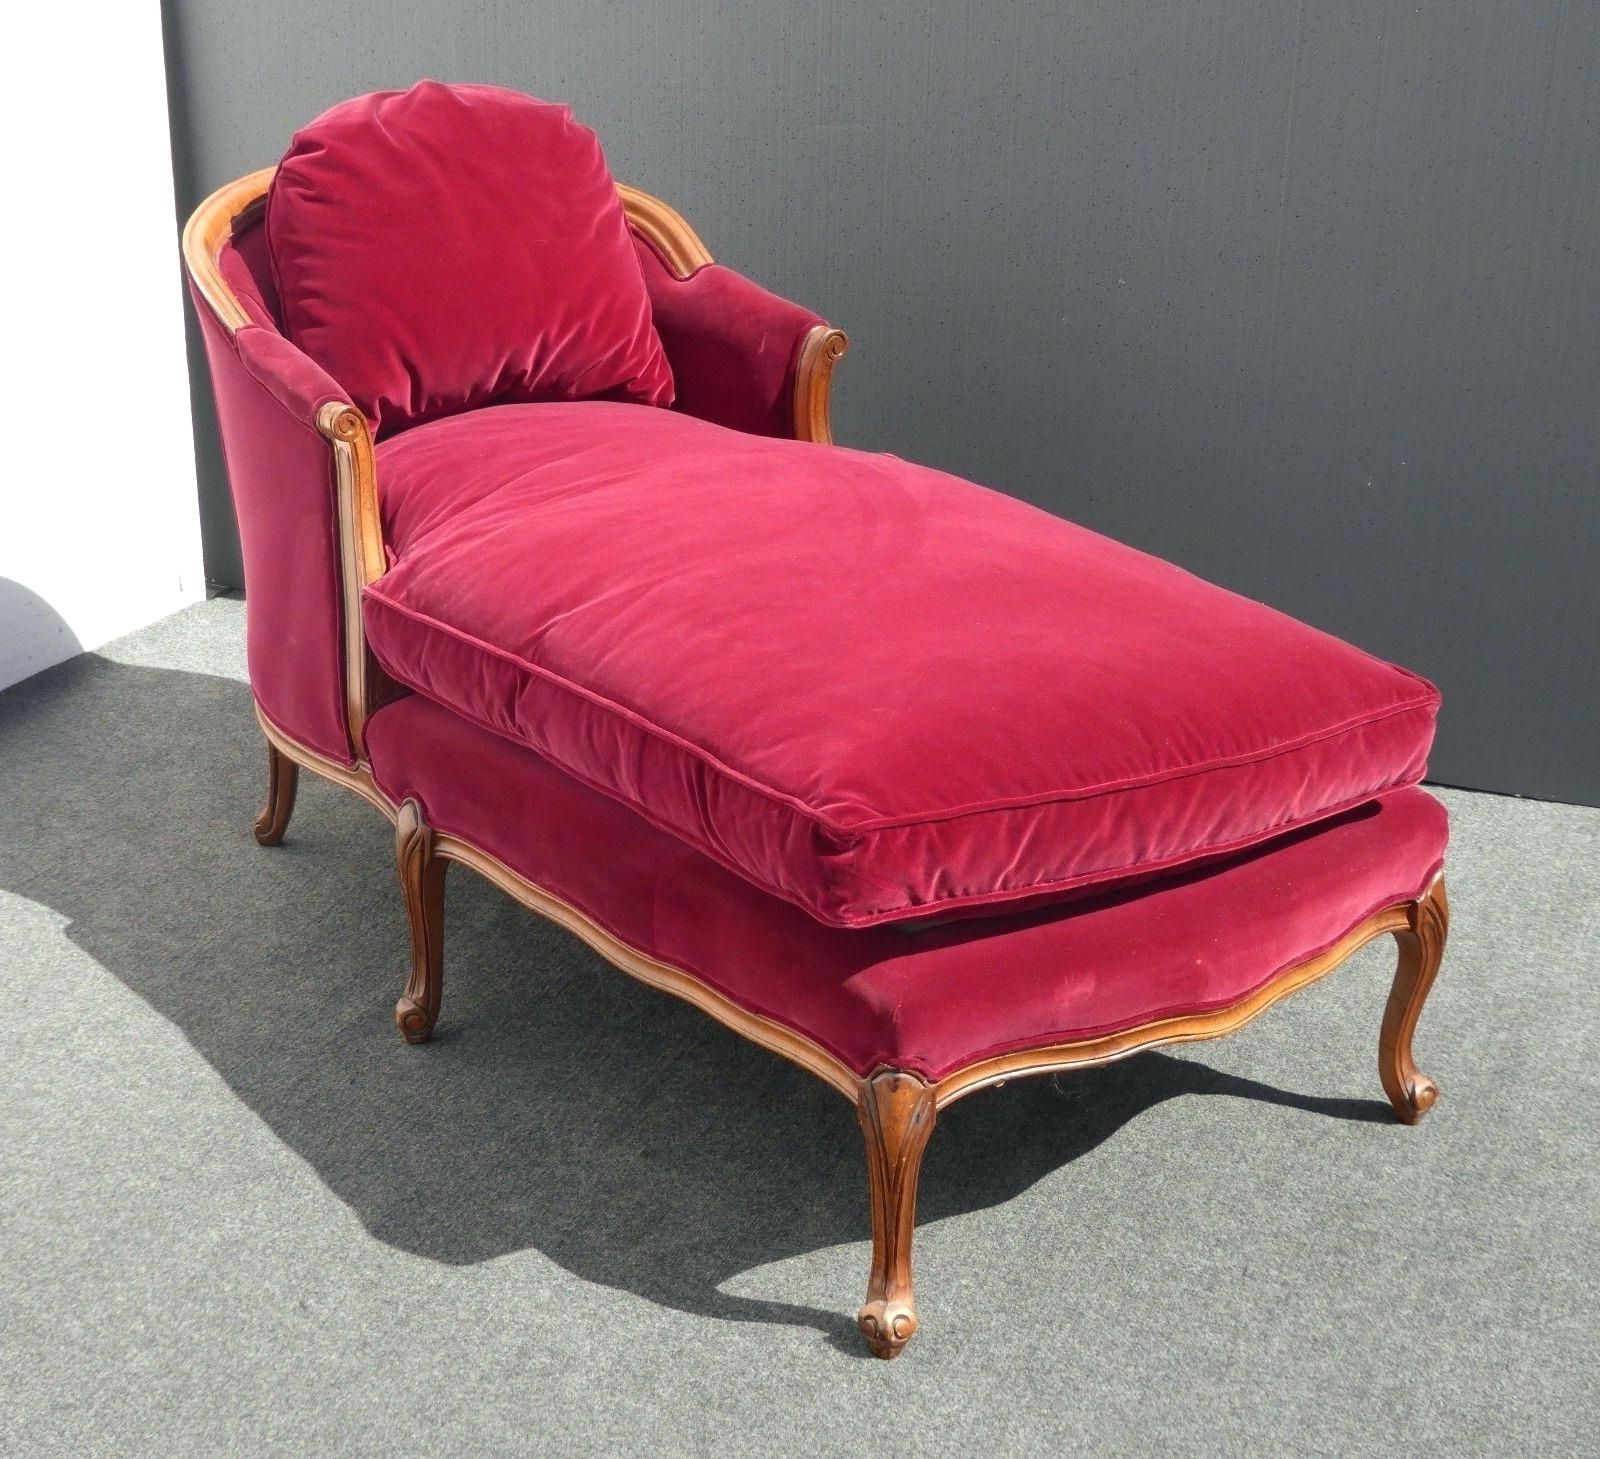 Hot Pink Chaise Lounge (View 6 of 15)